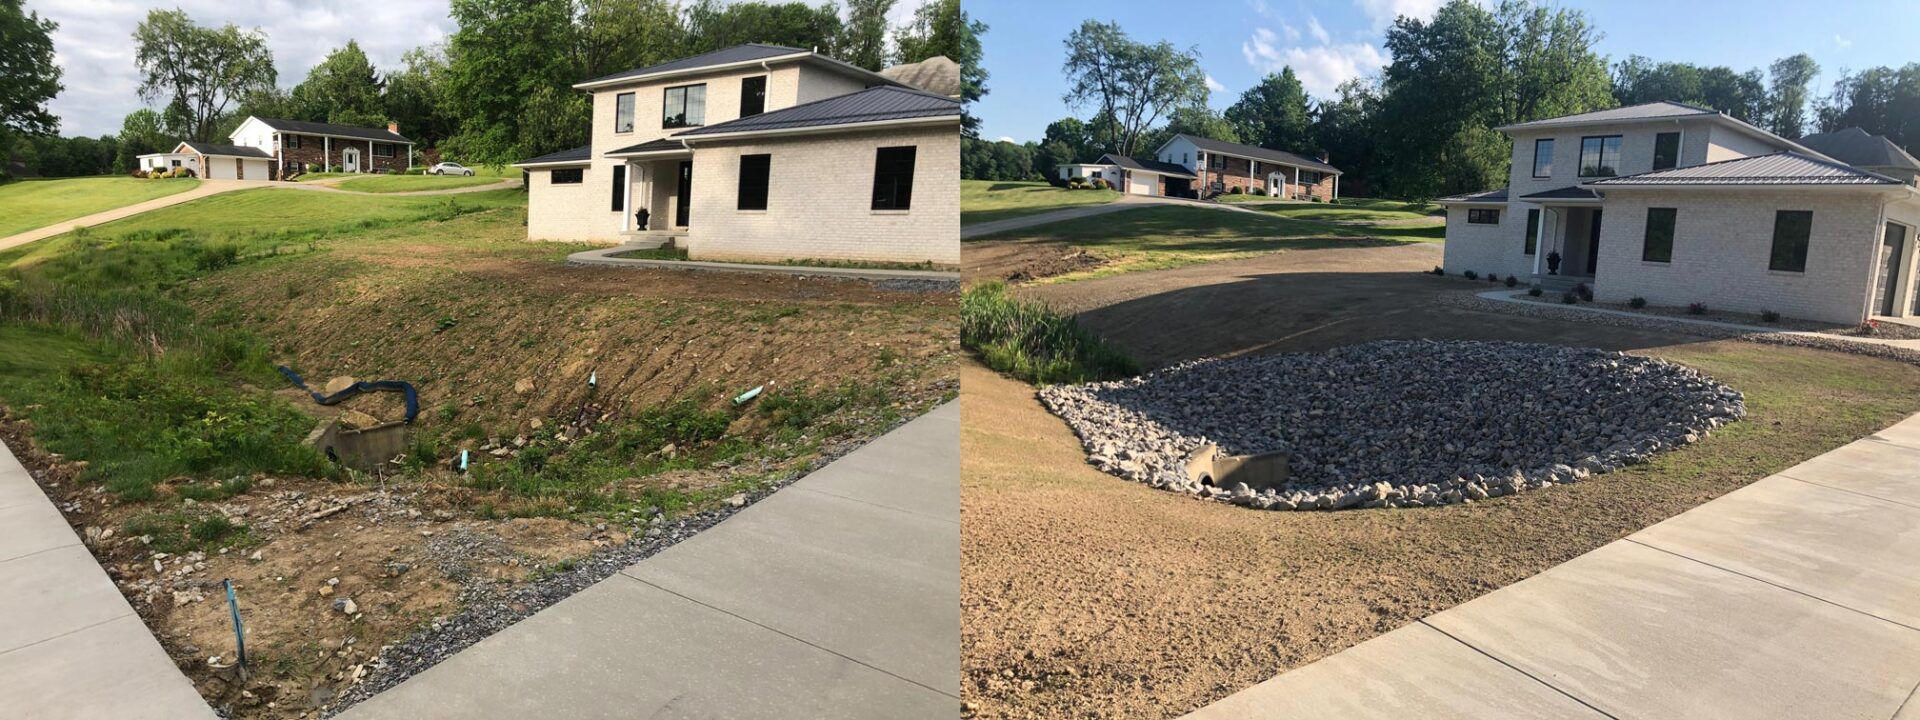 Before And After Landscape Adding Gravel — Beaver County, PA — McCreary's Lawn Care